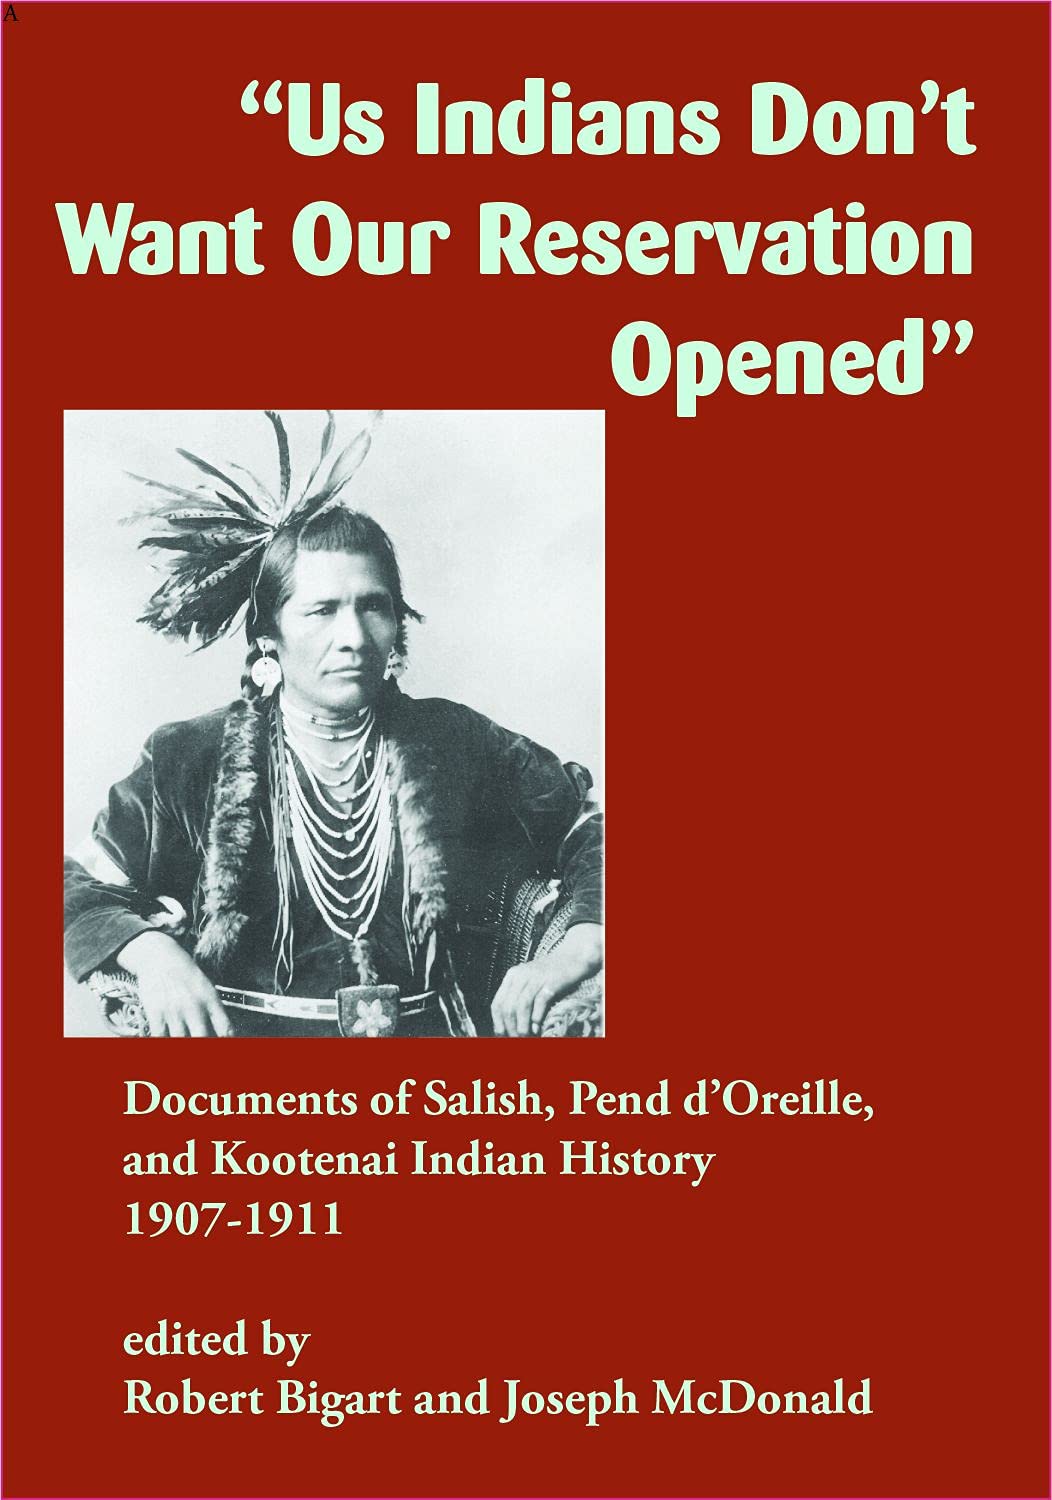 Us Indians Don't Want Our Reservation Opened: Documents of Salish, Pend d'Oreille, and Kootenai Indian History, 1907-1911 edited by Robert Bigart & Joseph McDonald